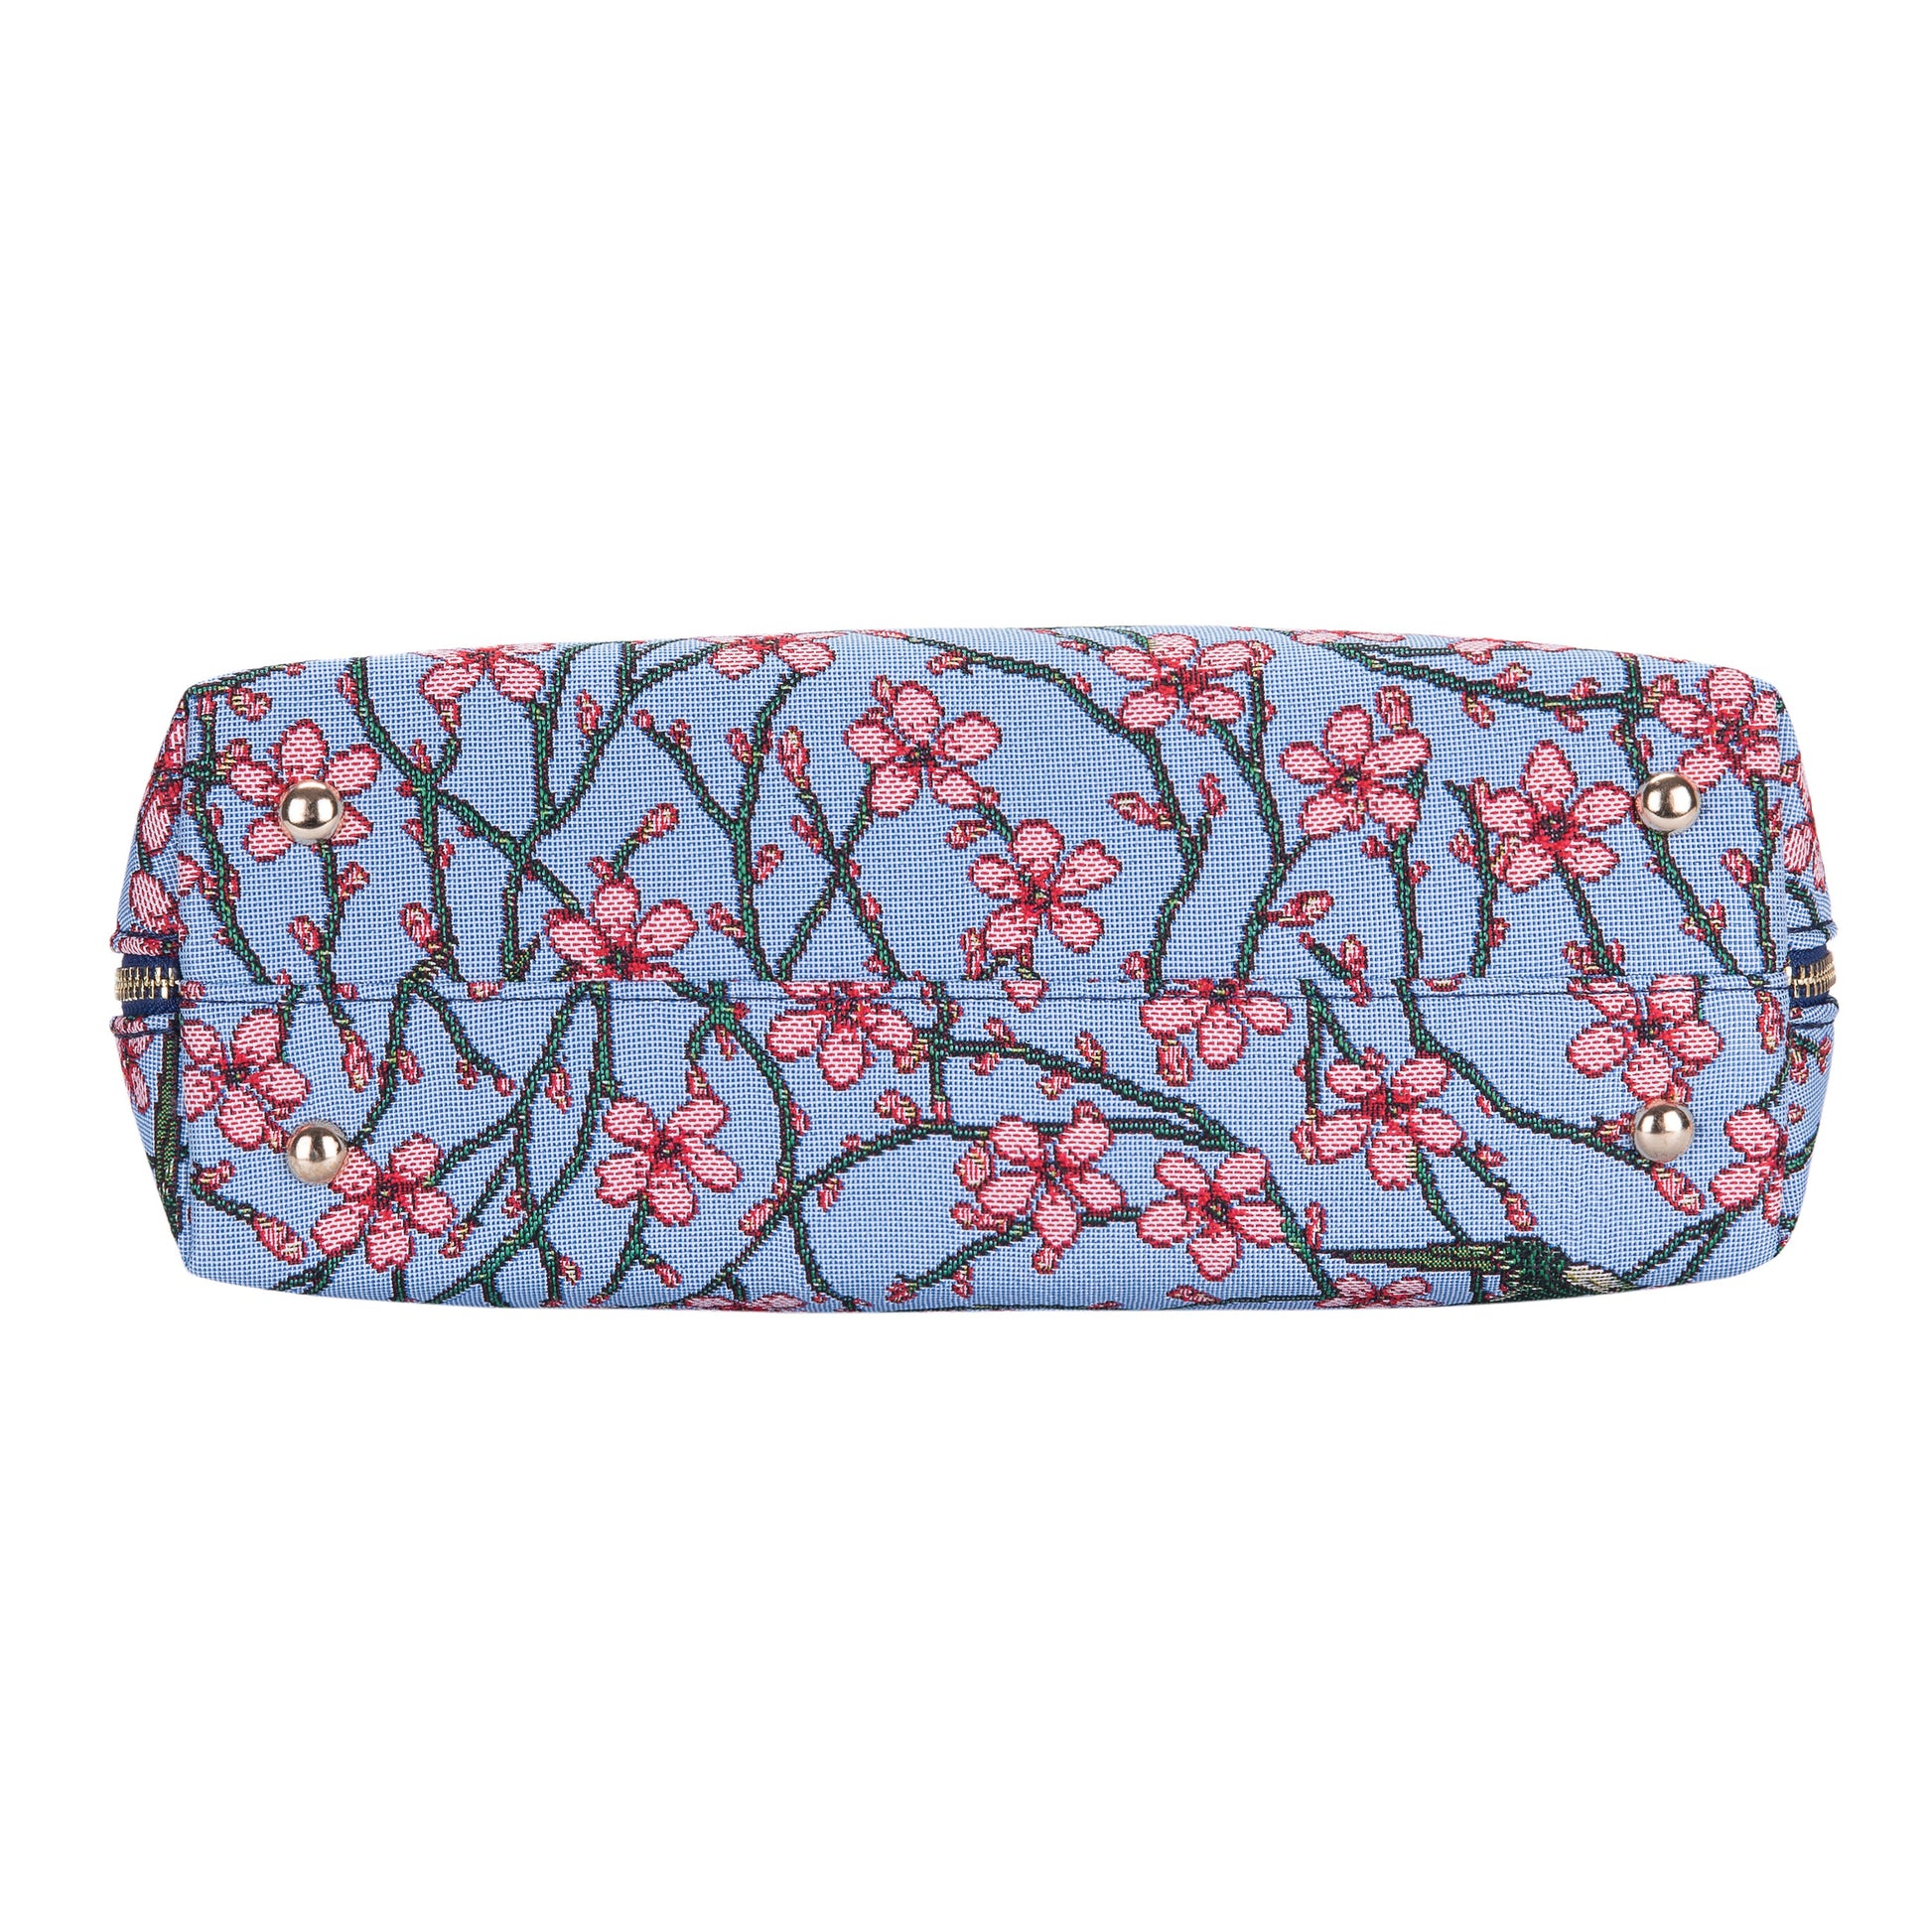 V&A Licensed Almond Blossom and Swallow - Convertible Bag-5